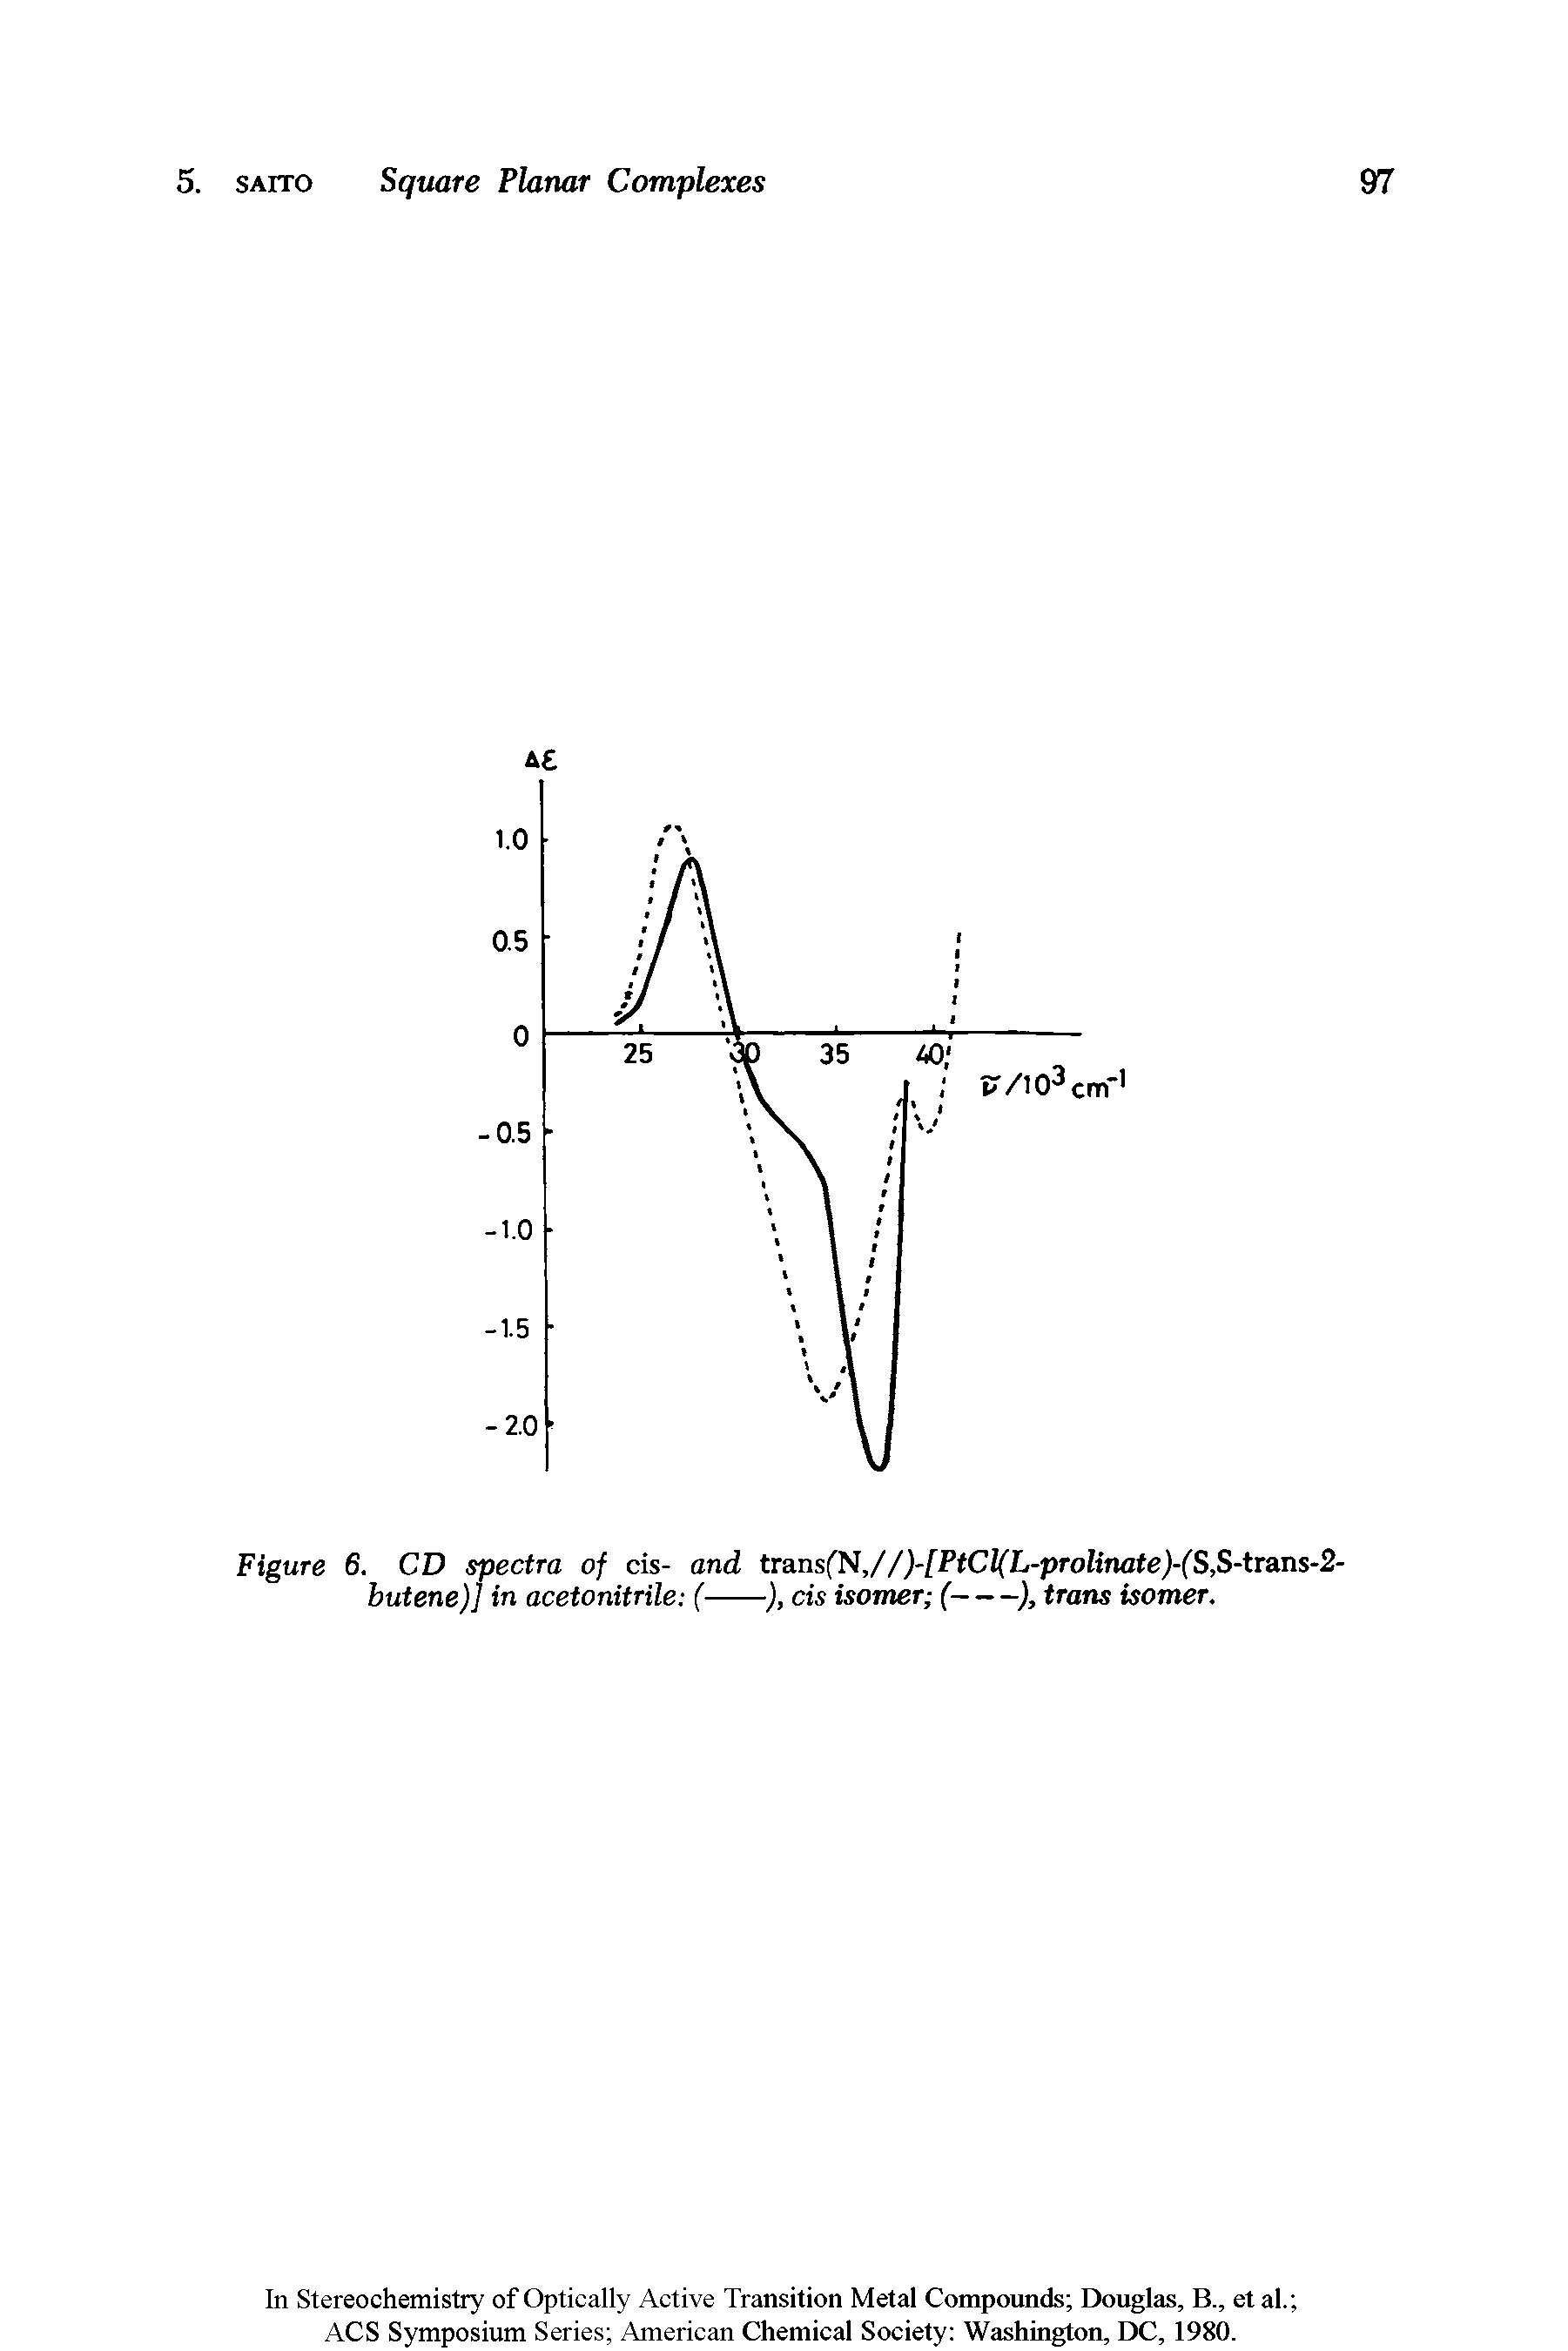 Figure 6. CD spectra of cis- and trans(N,//)-[PtCl(L-prolinate)-(S,S-trans-2-butene)] in acetonitrile (-------------), cis isomer (---), trans isomer.